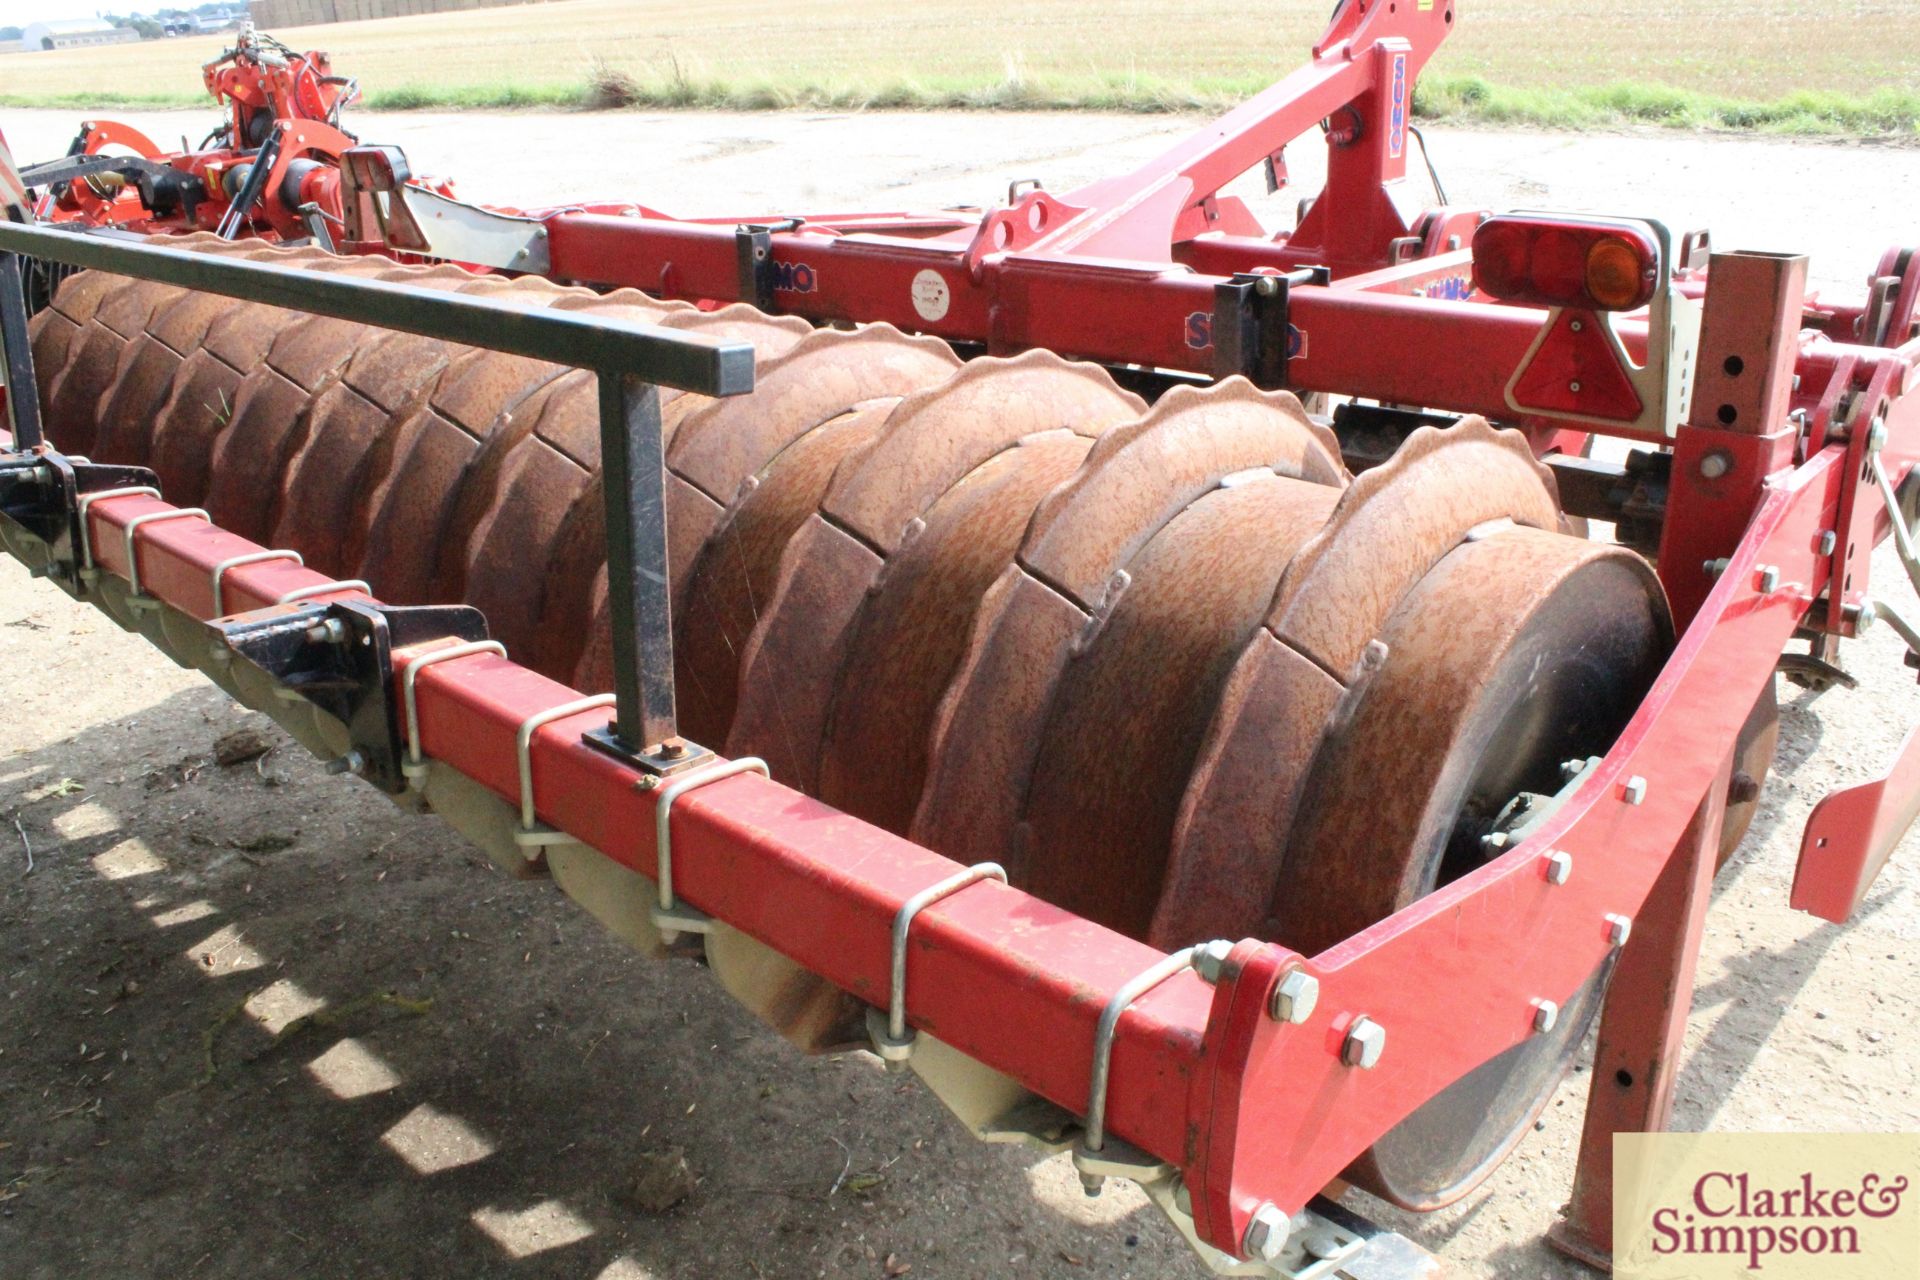 Sumo Trio 3 3m mounted cultivator 2012. Serial number 11626. With six Metcalfe low disturbance legs, - Image 14 of 21